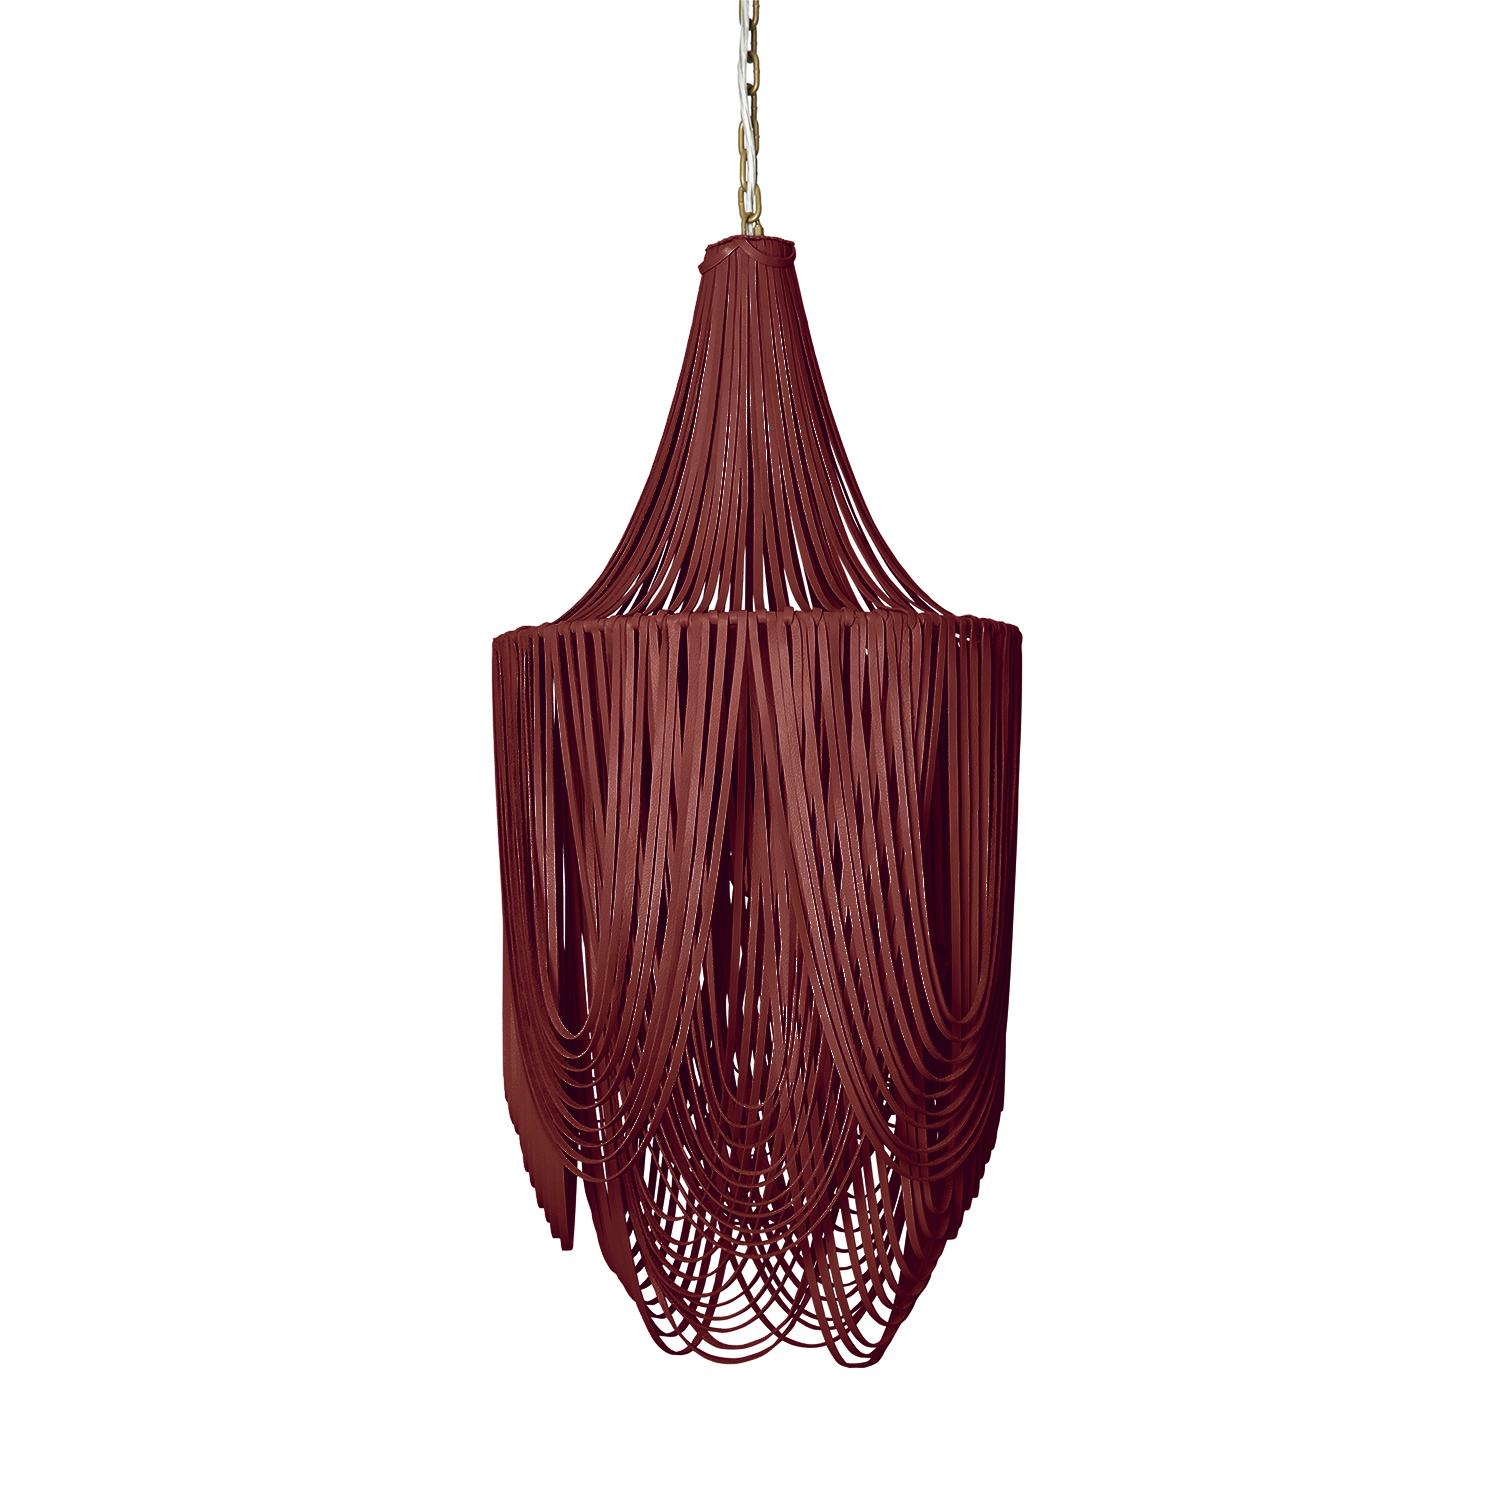 Small Round Whisper with Crown Leather Chandelier in NeKeia Leather